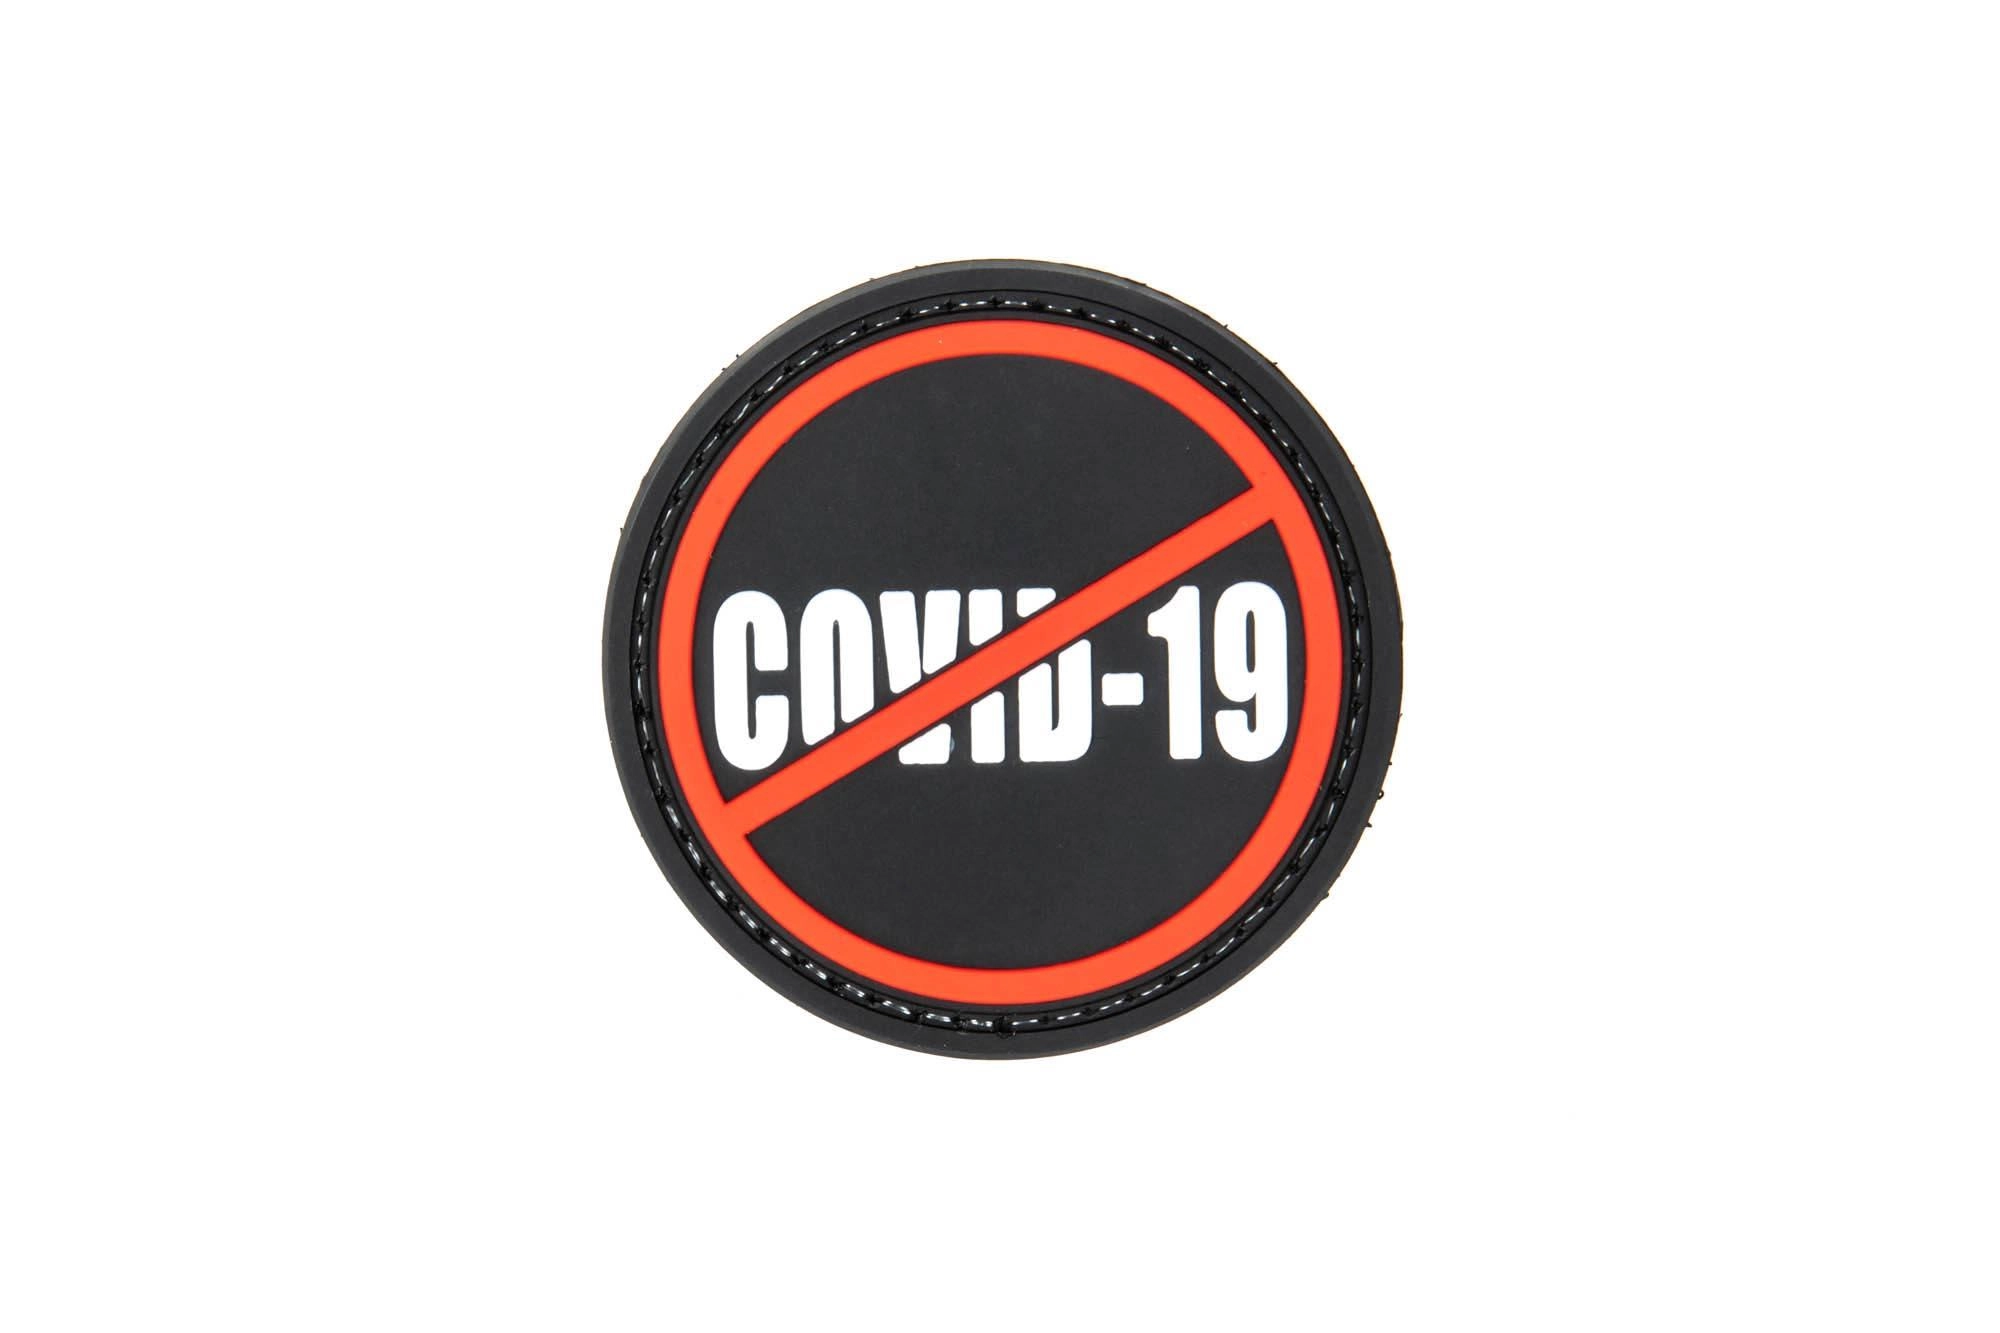 3D Patch - Stop COVID-19